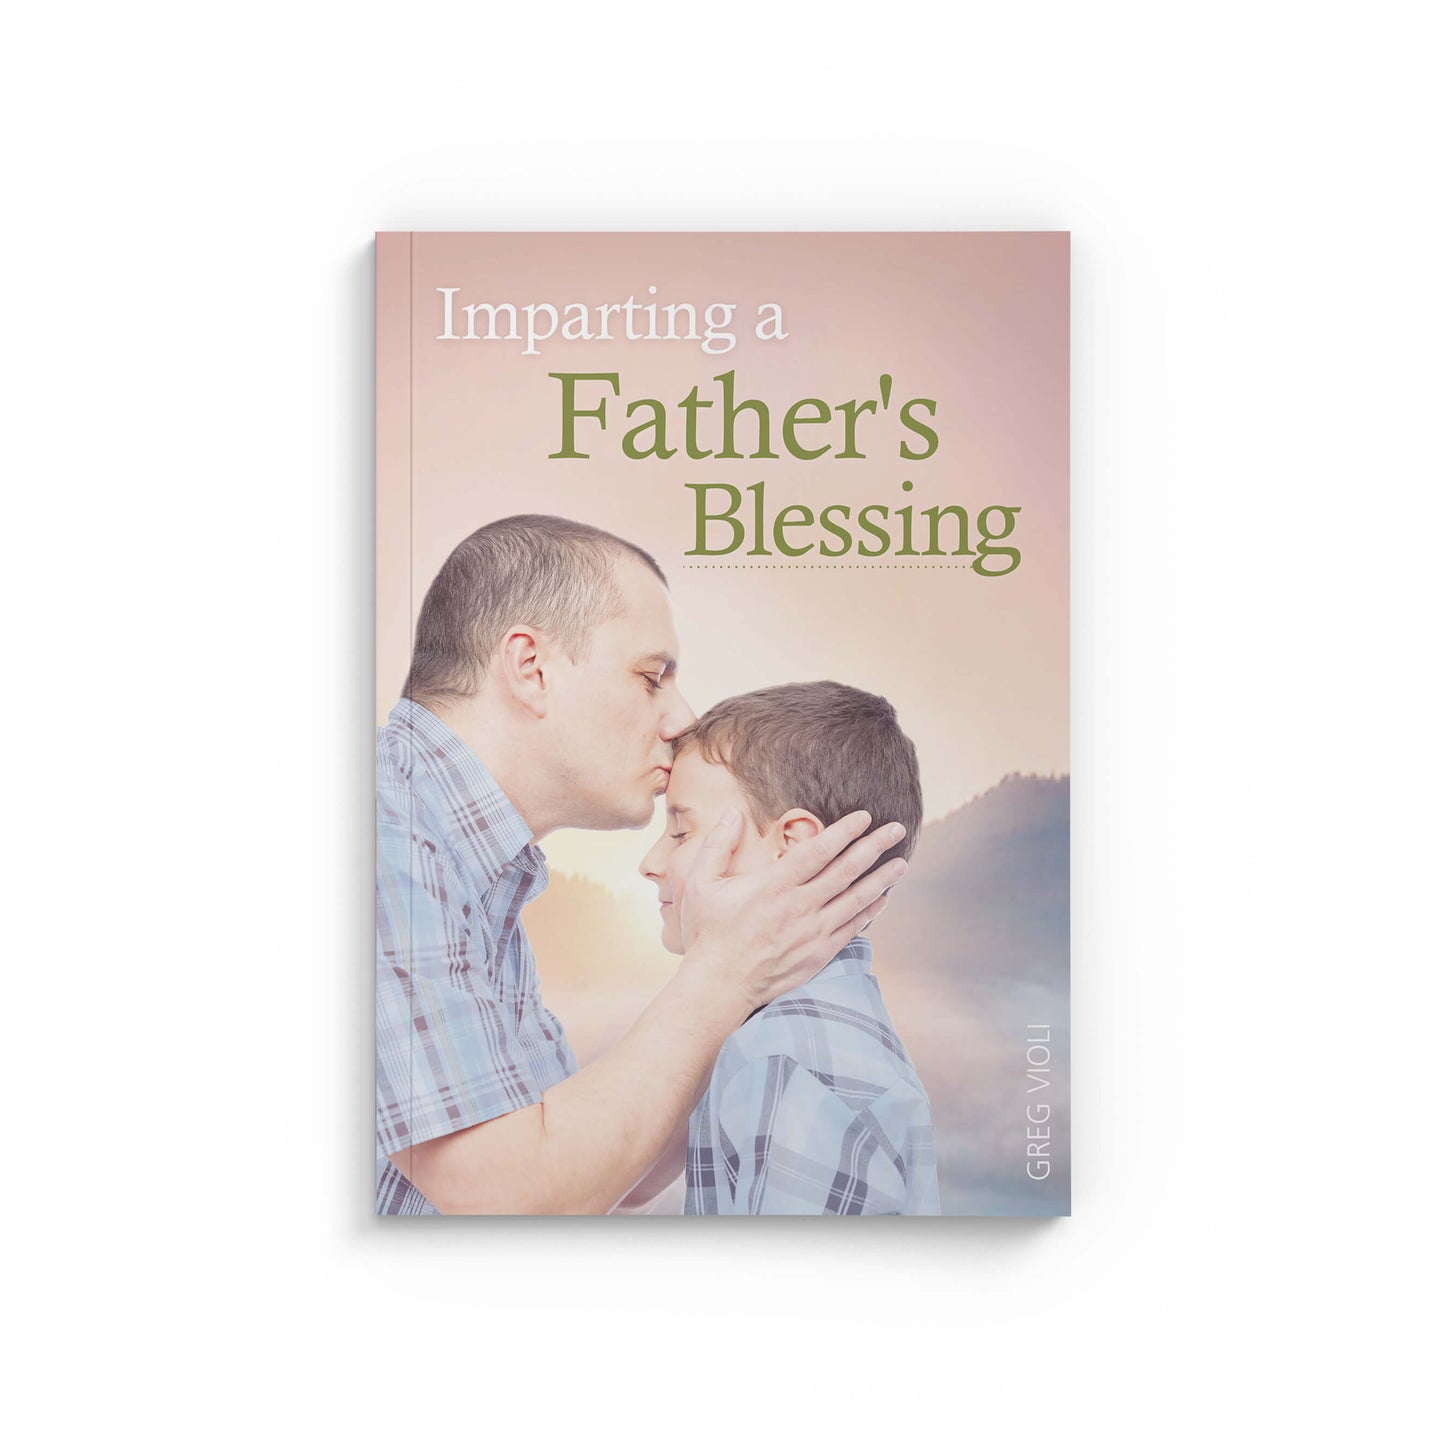 Imparting a Father's Blessing